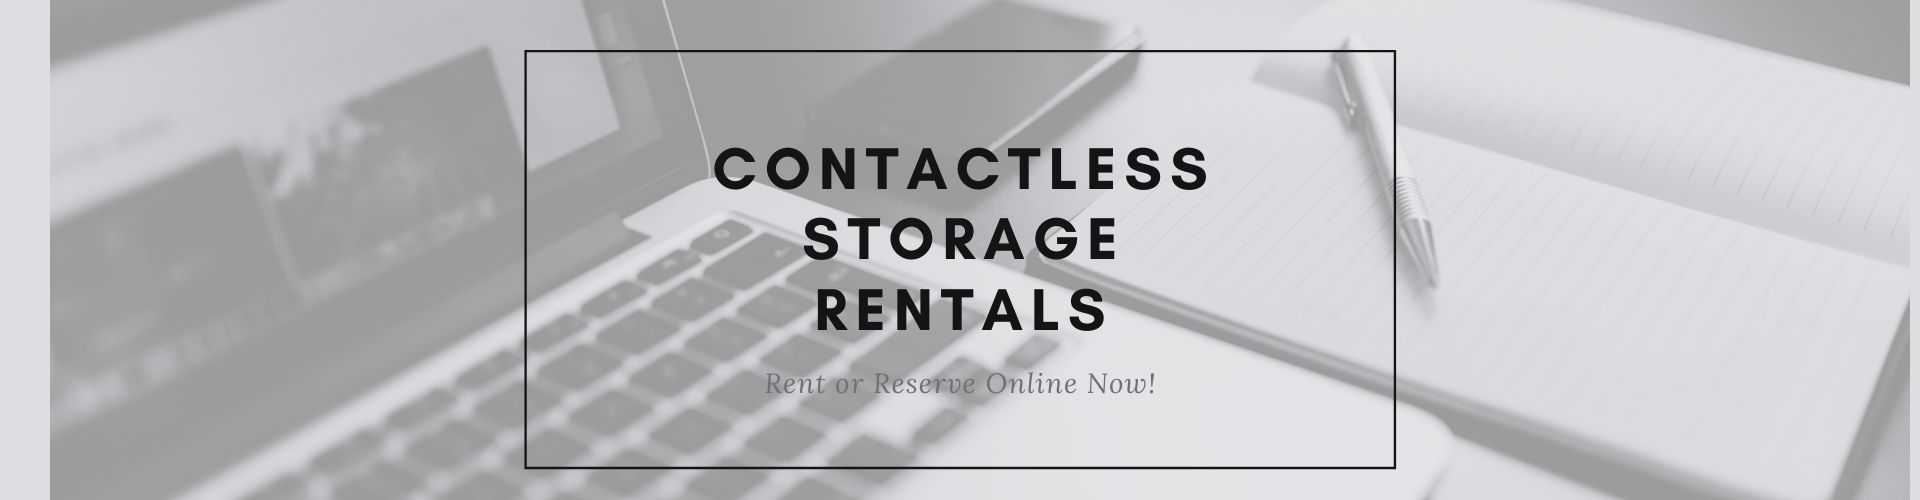 Contactless Storage Rentals in Carlisle PA